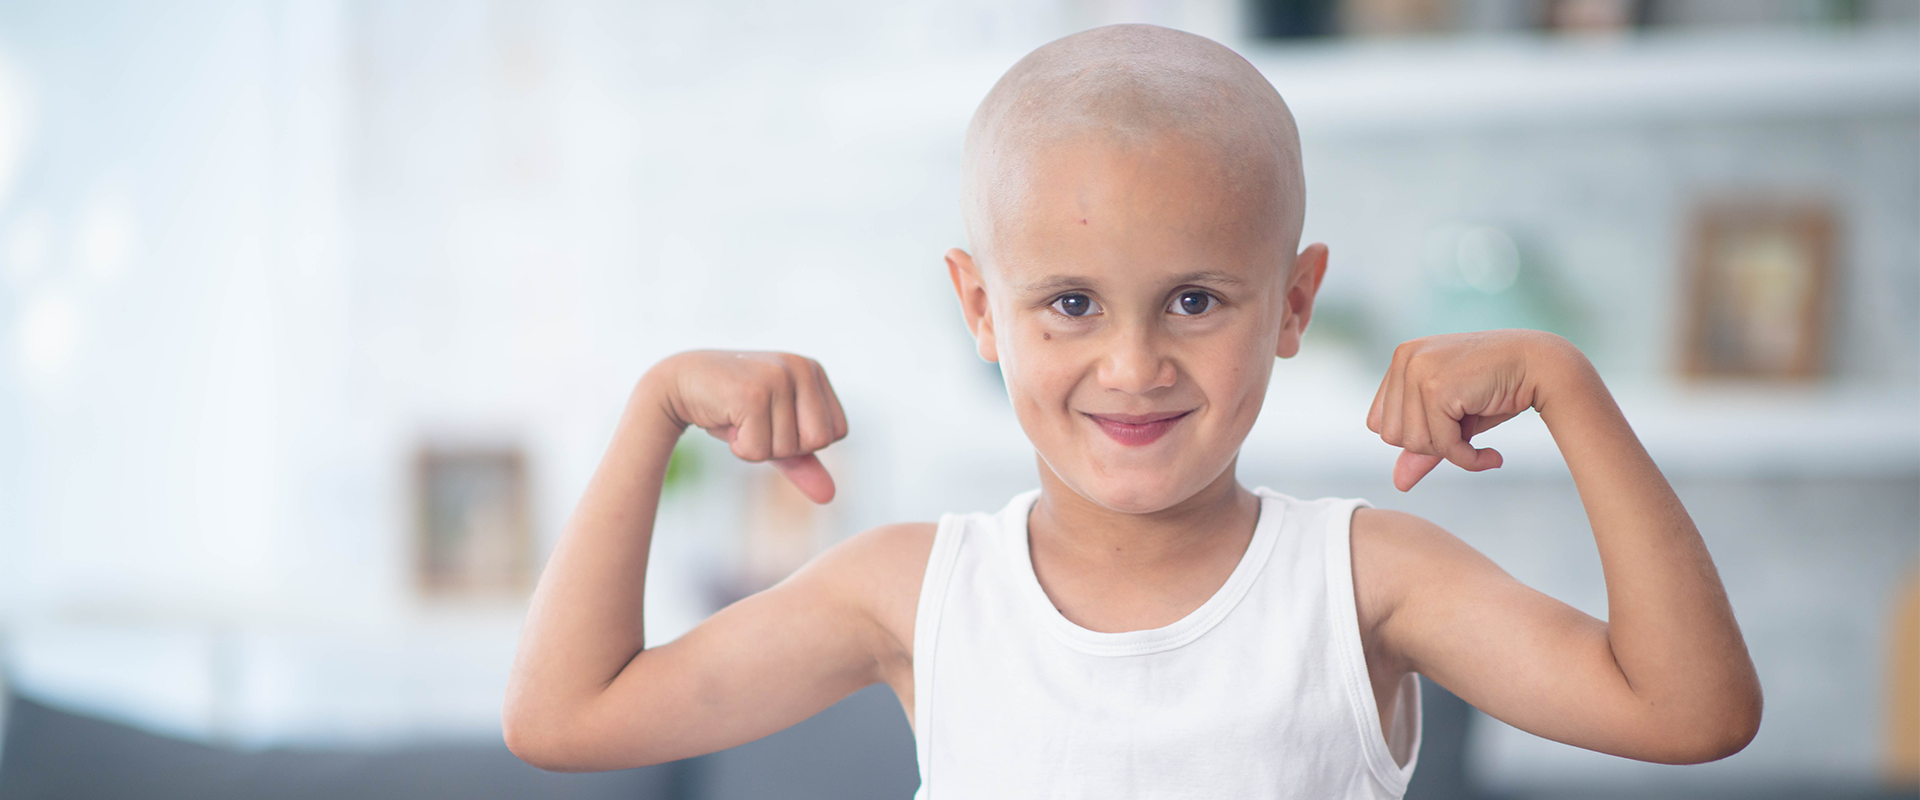 Boy with shaved hair showing off his muscles